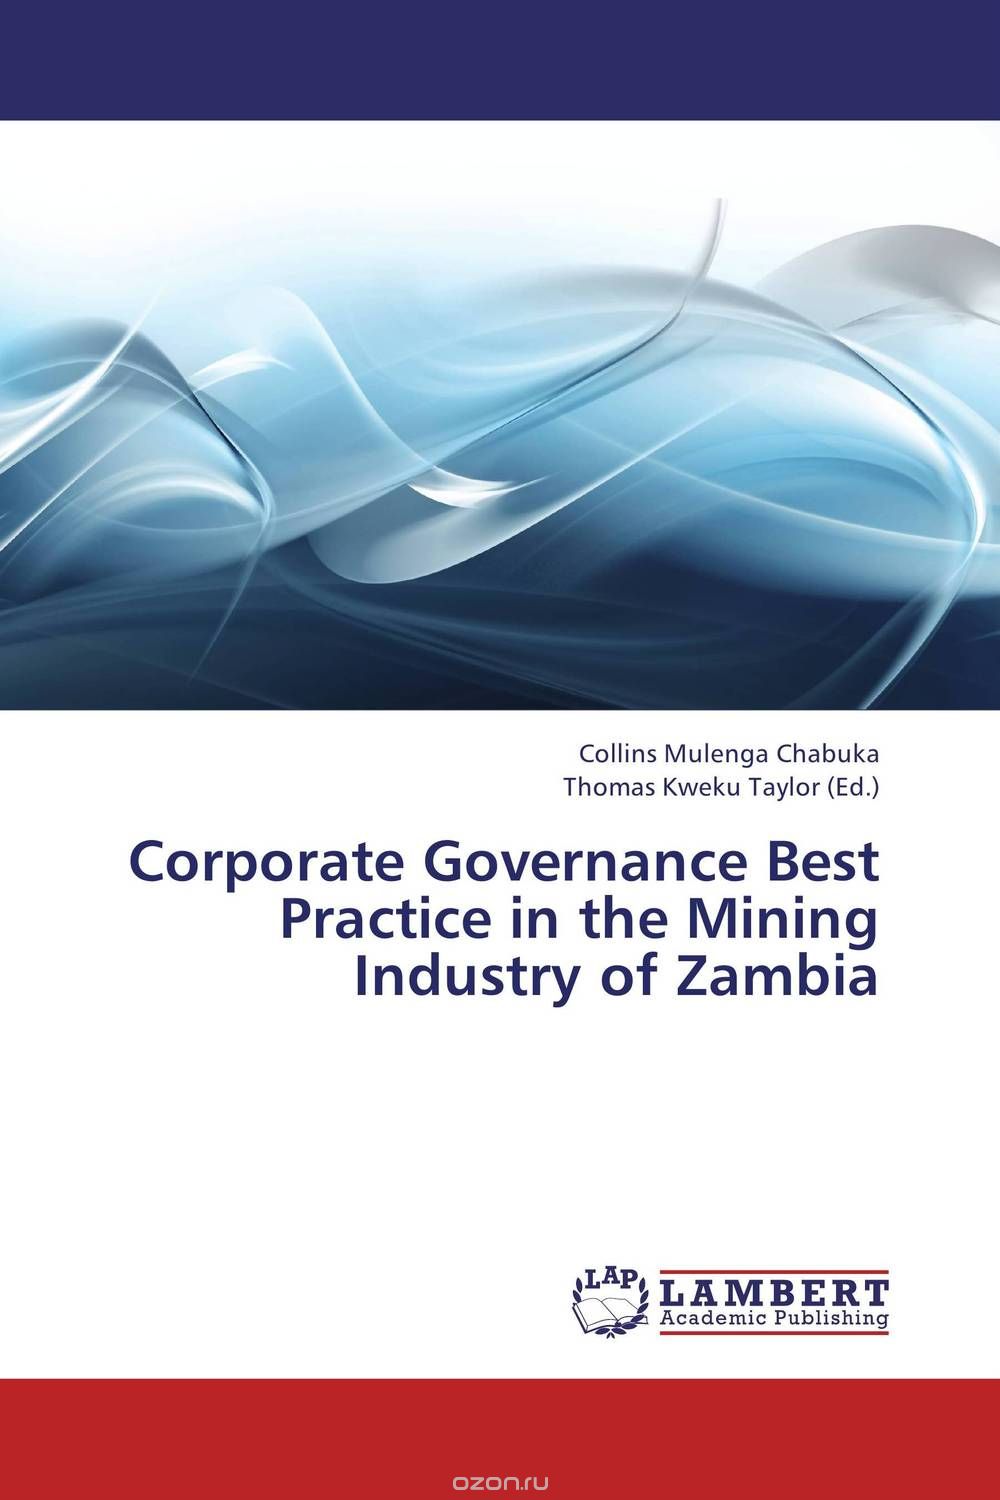 Corporate Governance Best Practice in the Mining Industry of Zambia